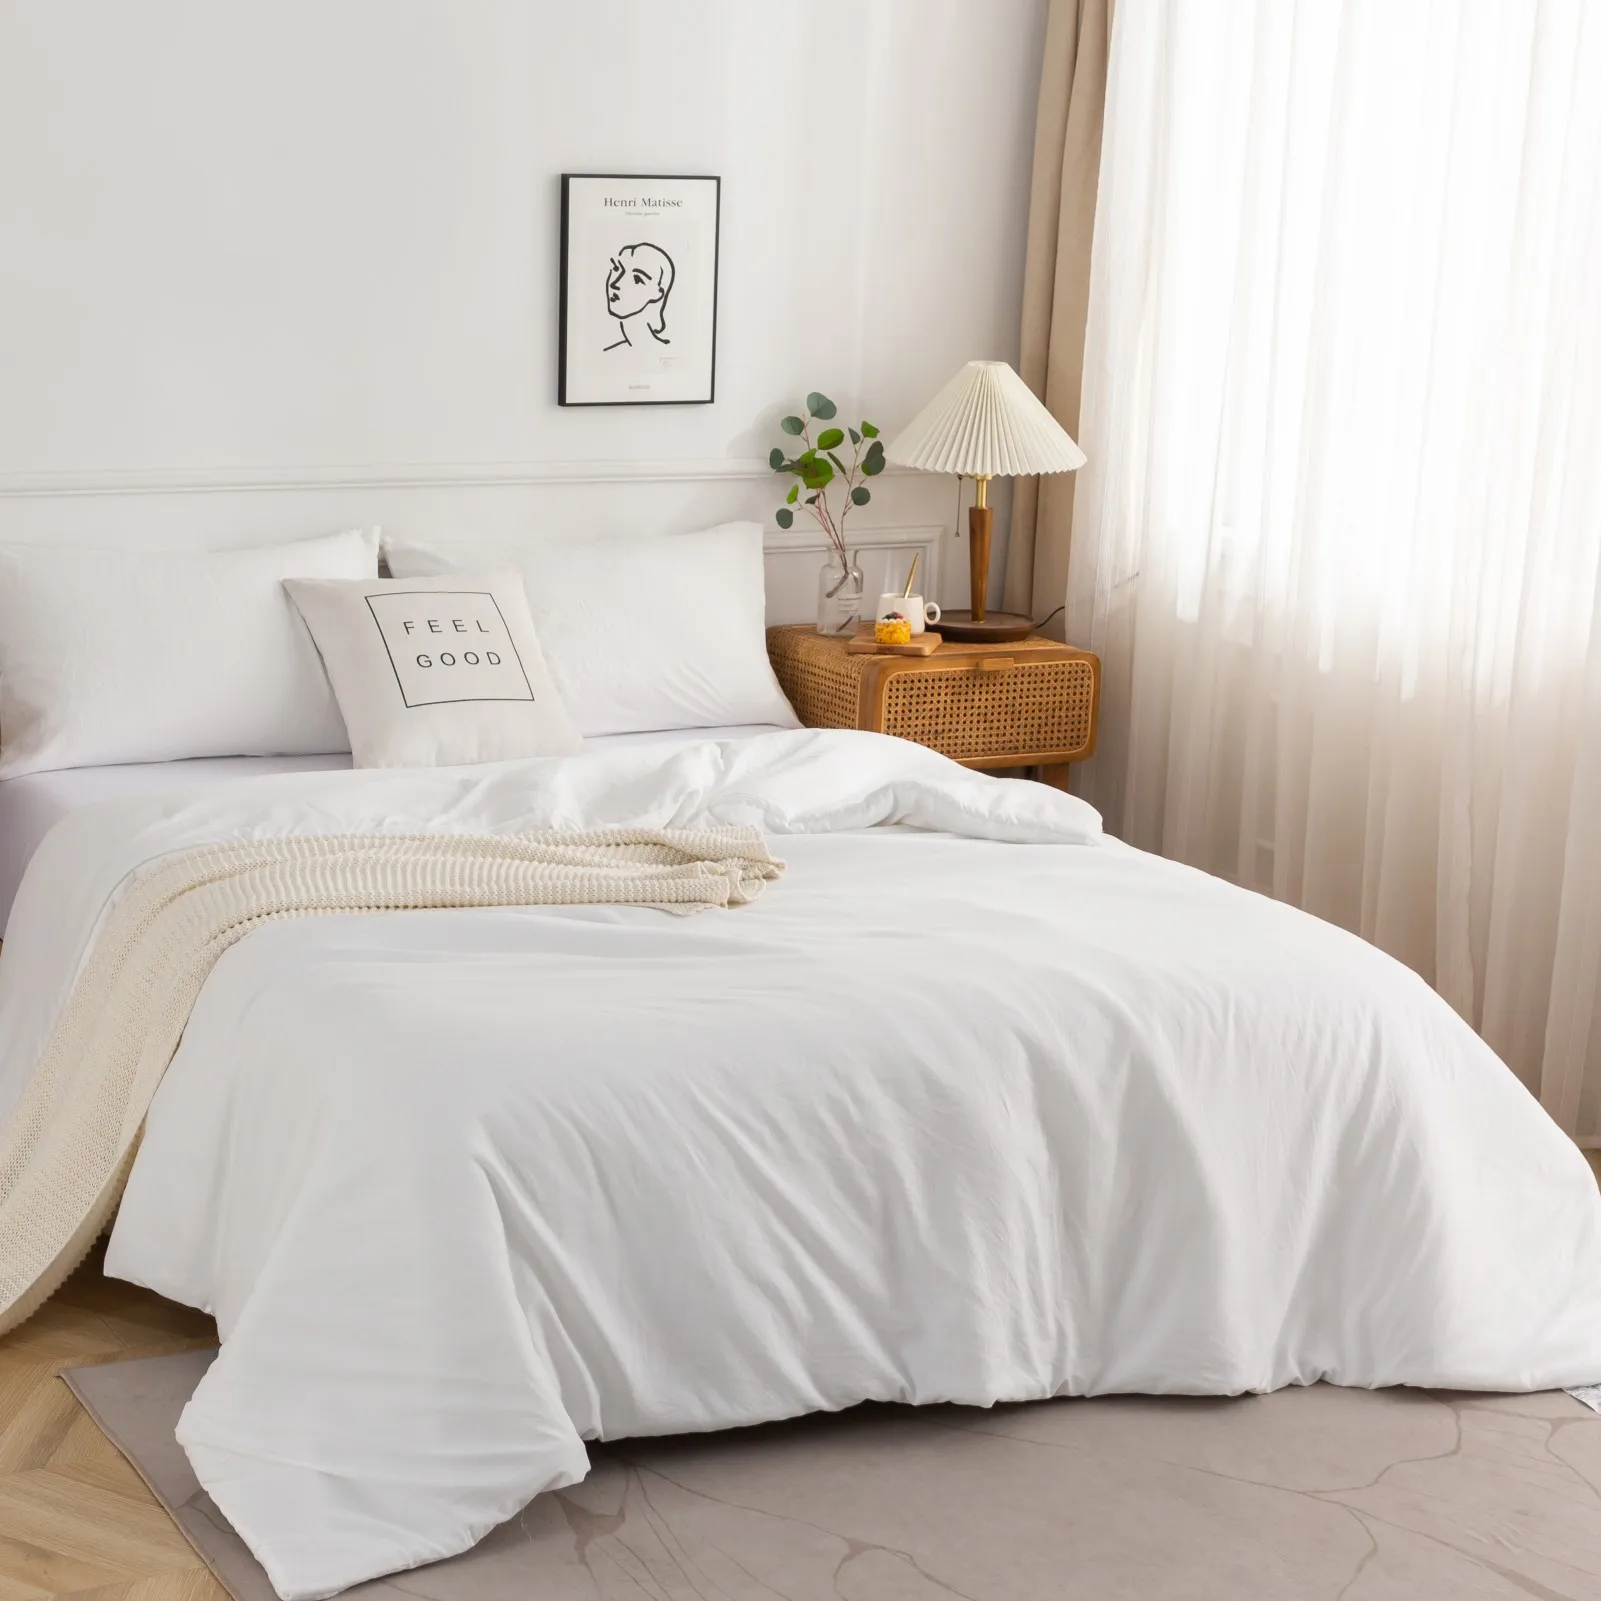 

Bedding Comforter Twin sets Ultra-Soft Cozy Lightweight All Season White Cotton Fabric And Pillow Sham